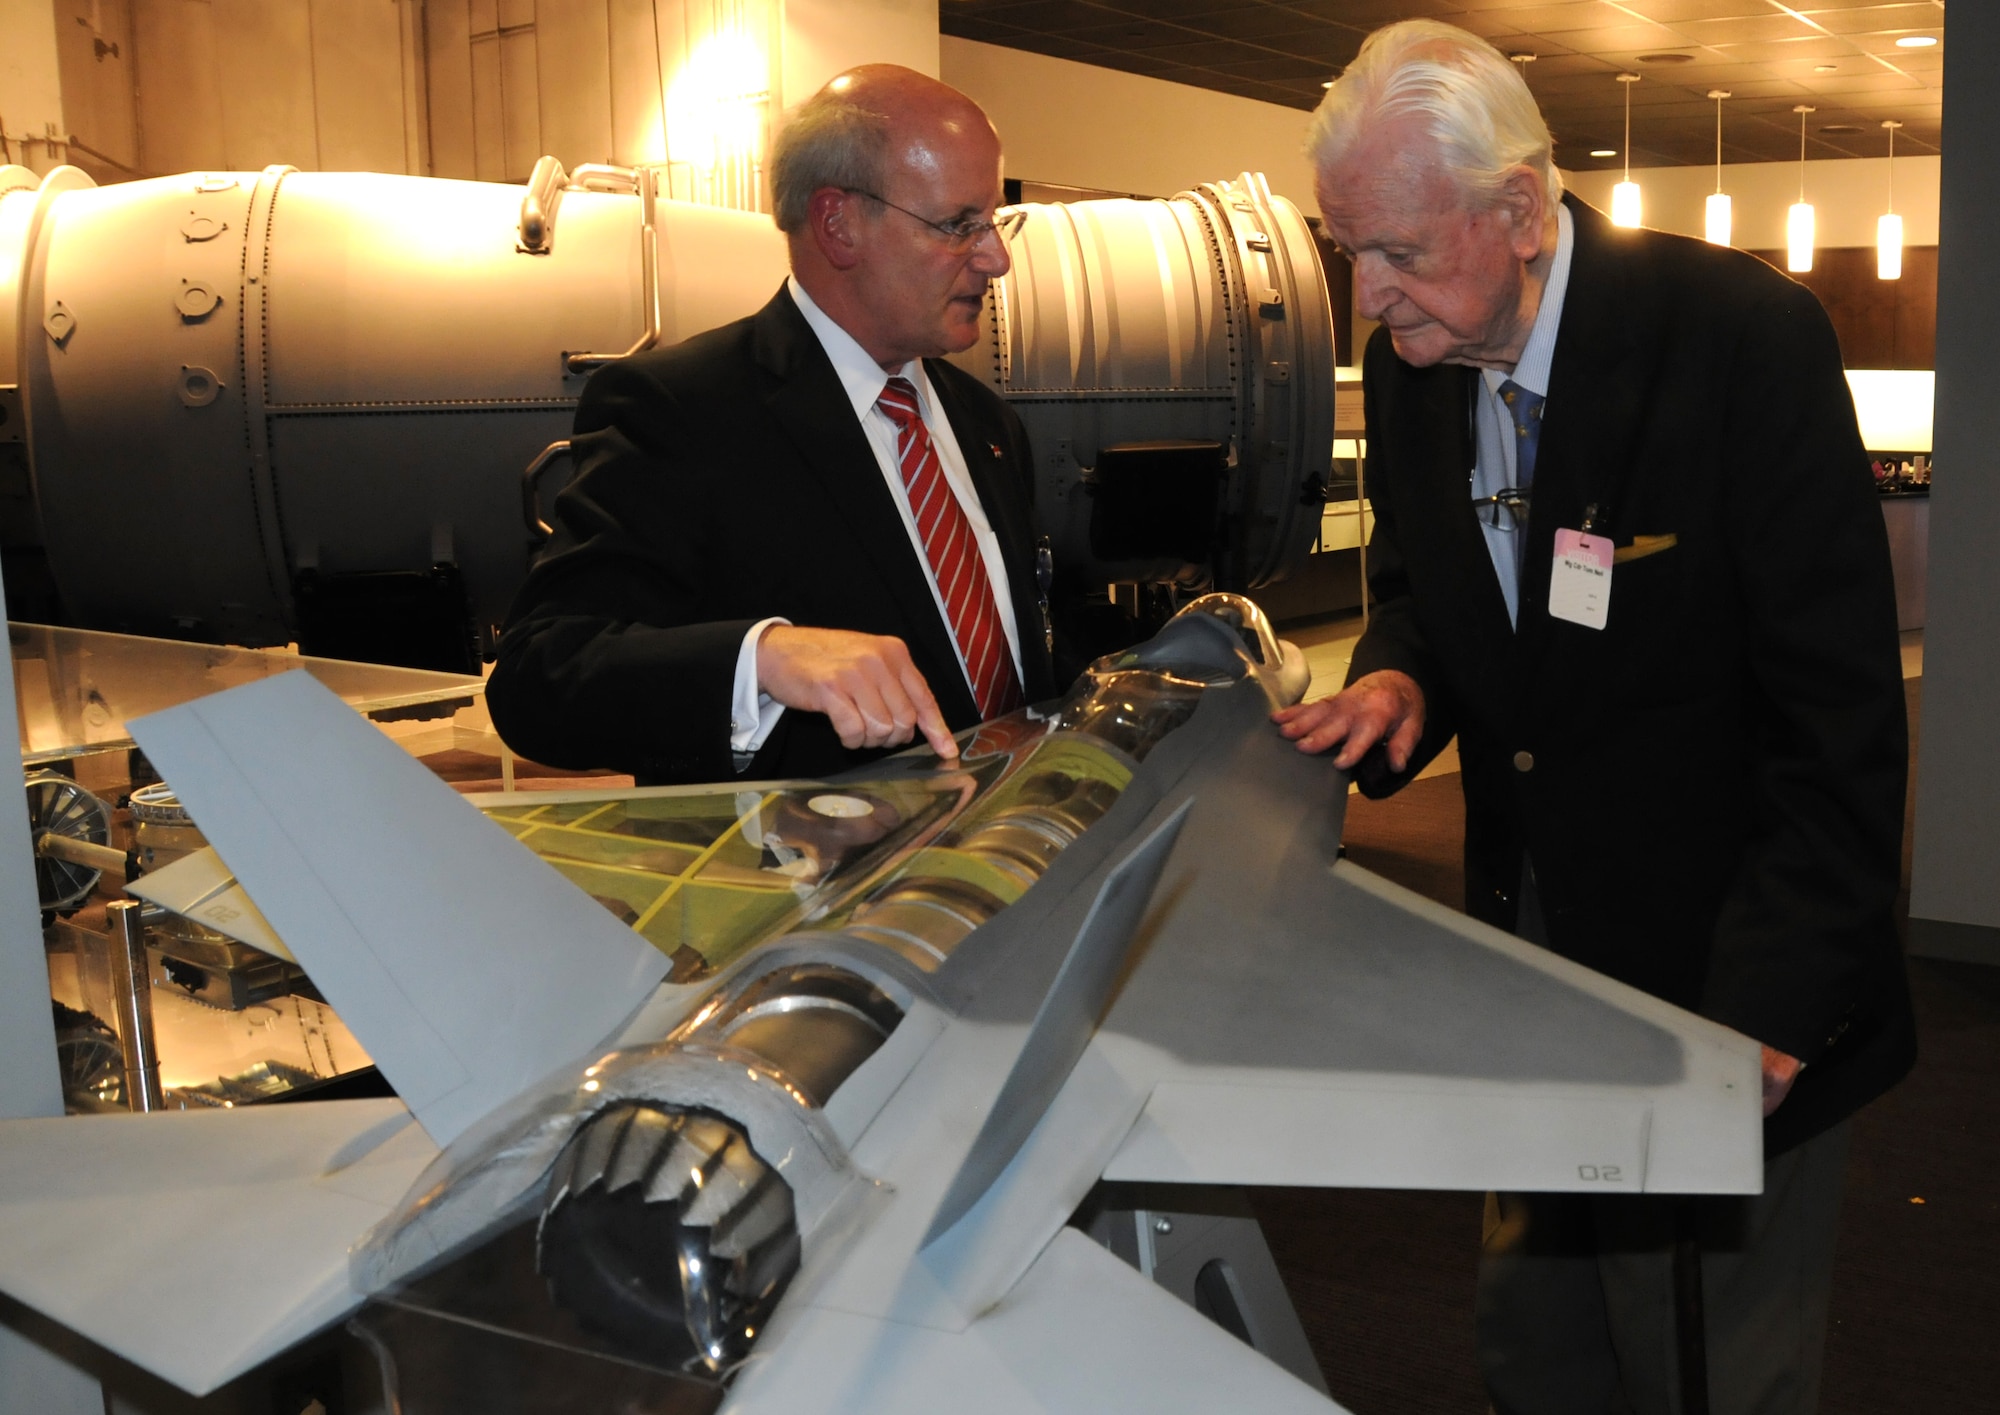 Michael Otterblad, director of international programs at Lockheed Martin, discusses the capabilities of the F-35 fighter jet with Tom “Ginger” Neil, a renowned flying ace, inside the corporation’s office in Arlington, Va., on Oct. 7, 2015. (U.S. Air Force photo/Sean Kimmons)